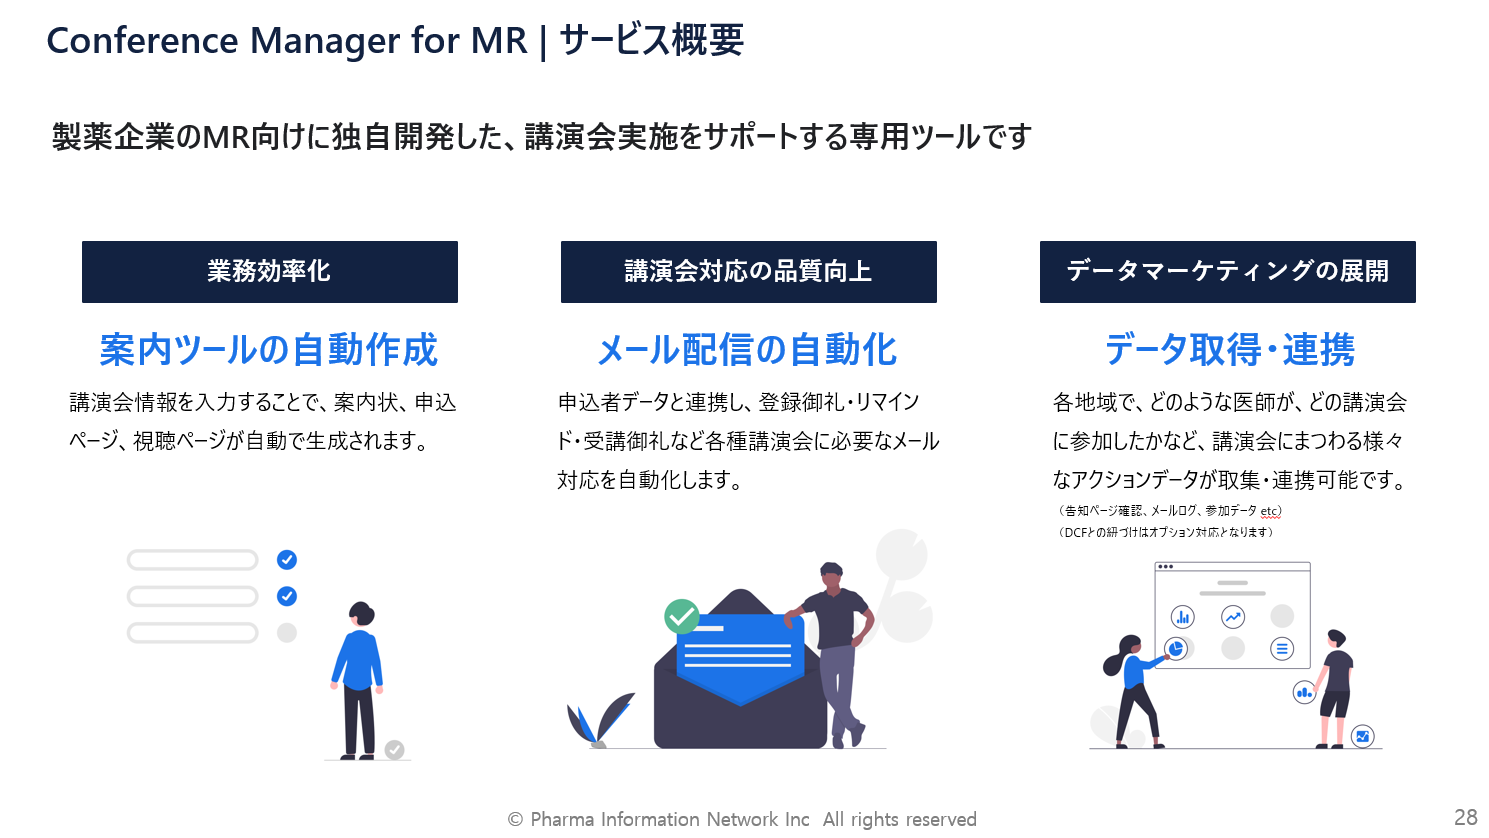 Conference Manager for MRサービス概要